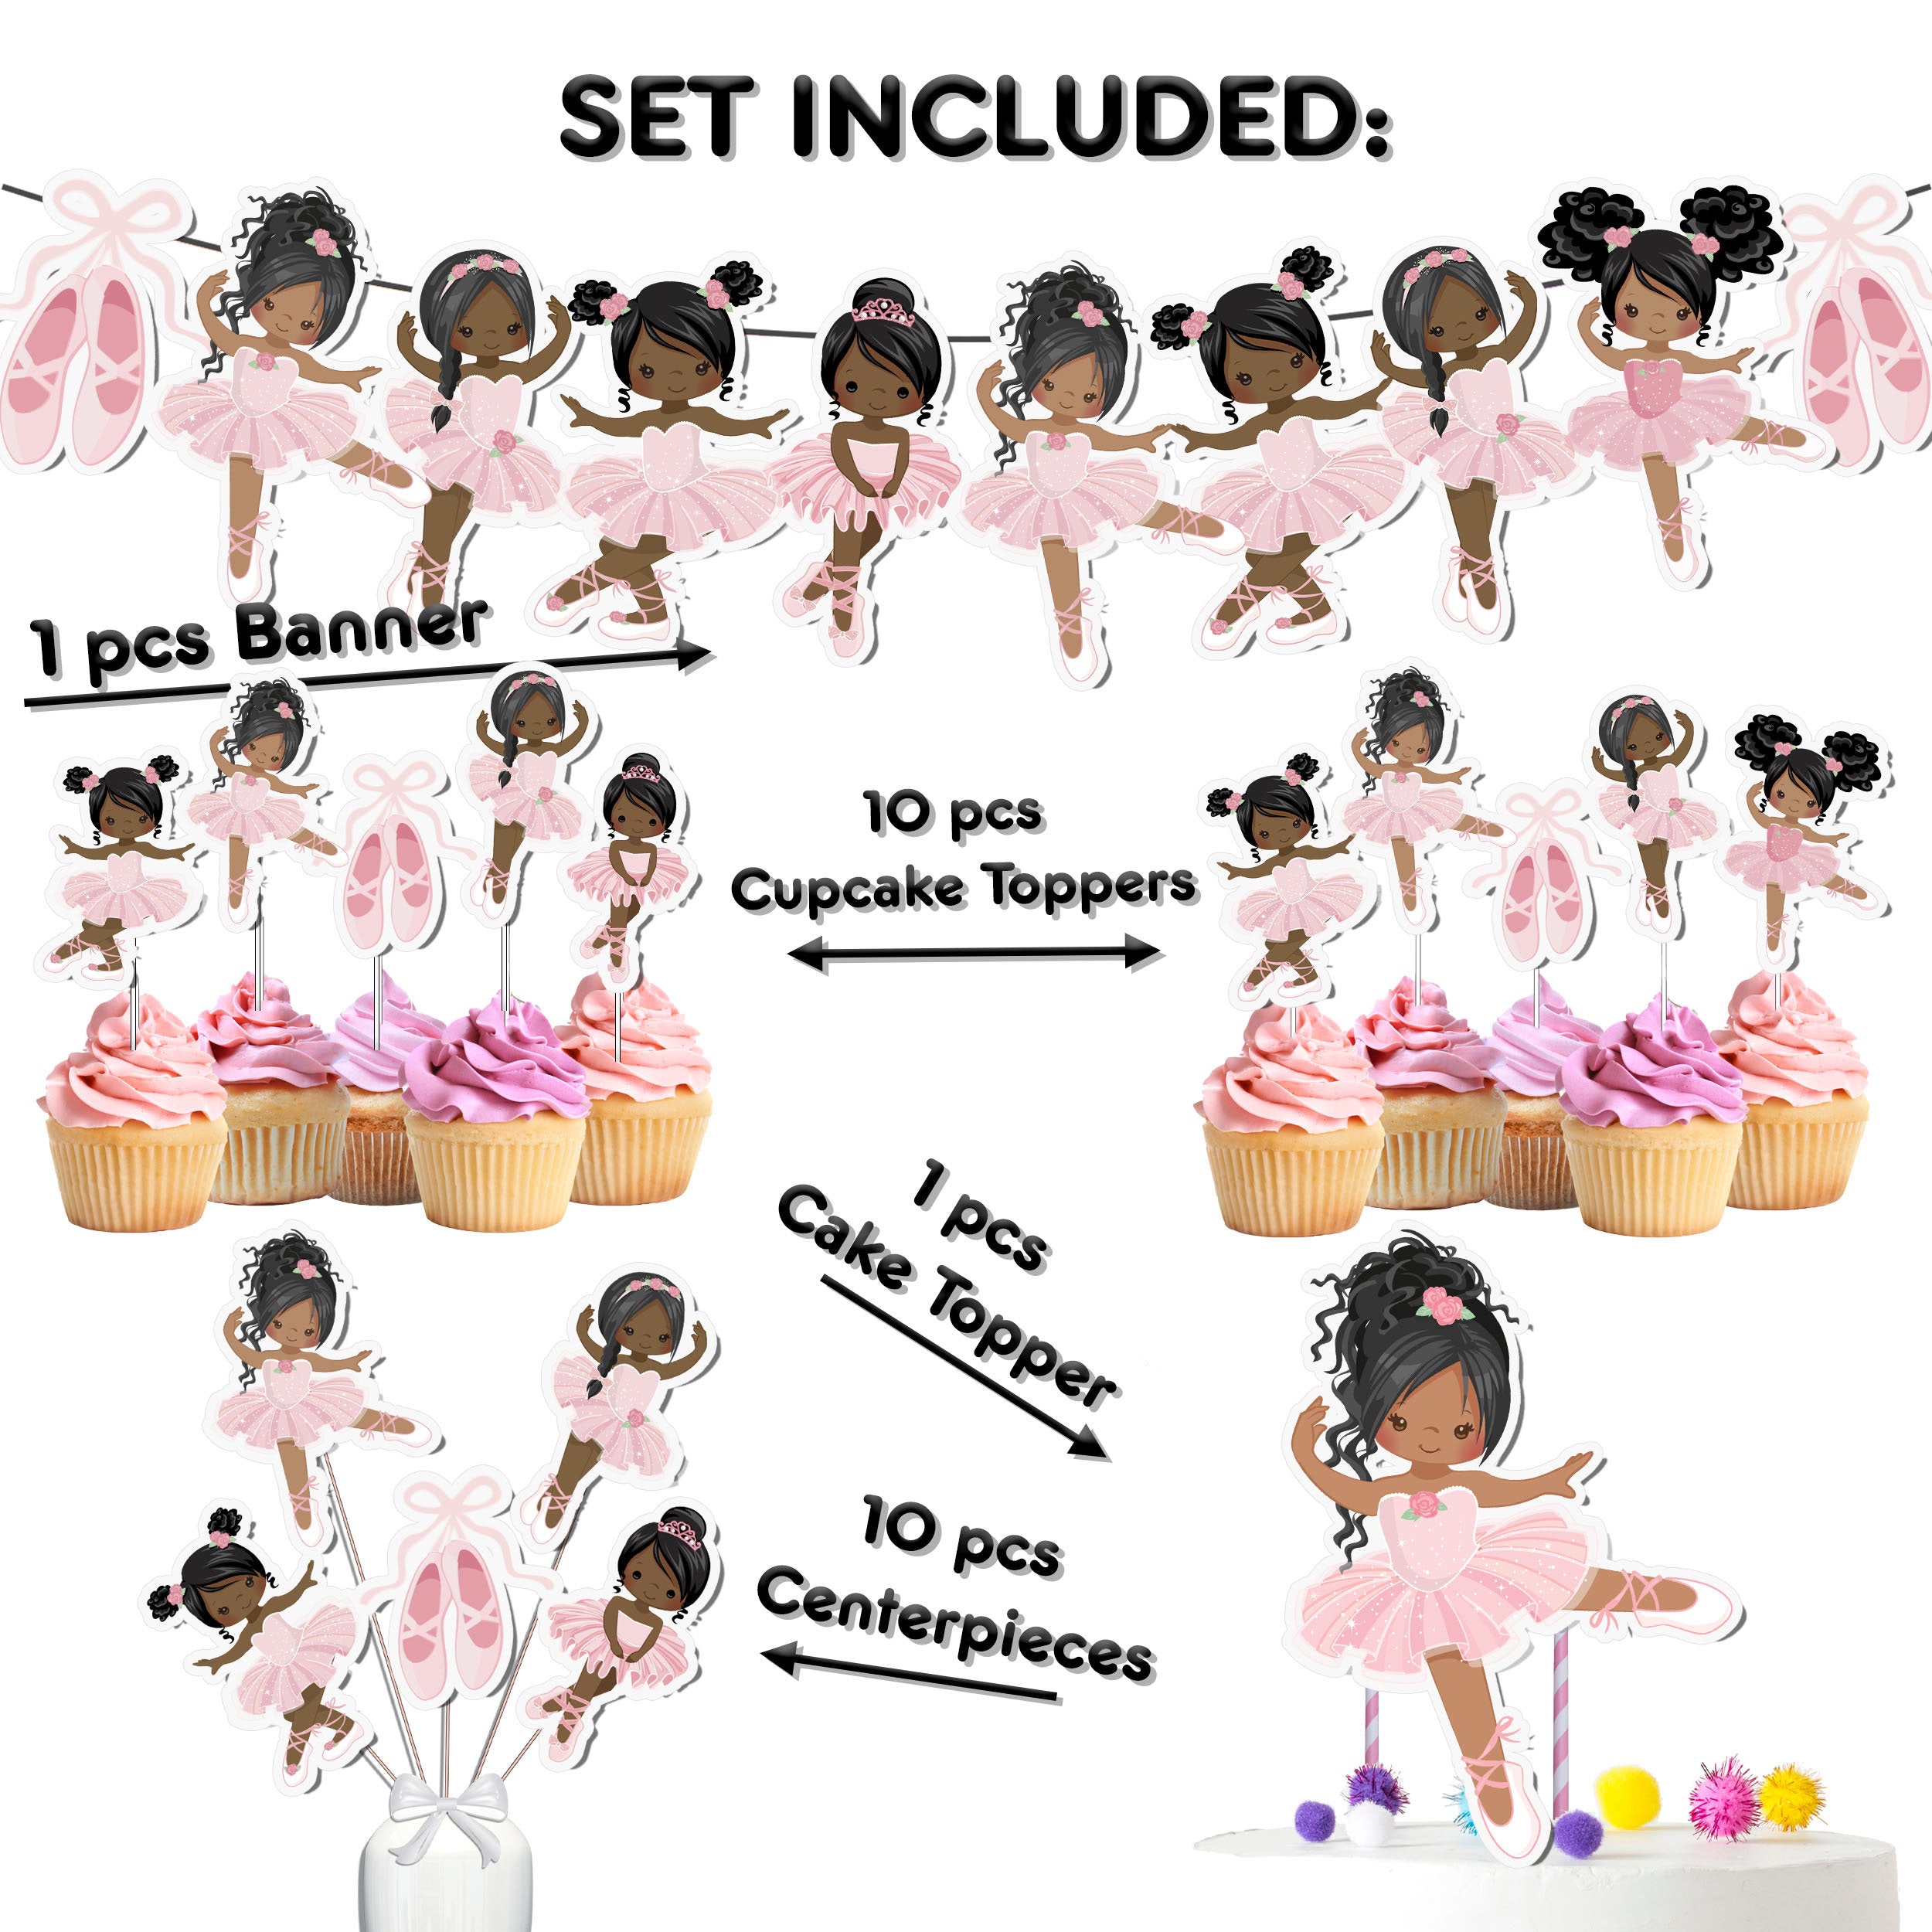 Pink Afro Ballerina Party Decor Set - Enchanting Cake Topper, Cupcake Toppers, Centerpieces & Banner for a Magical Celebration